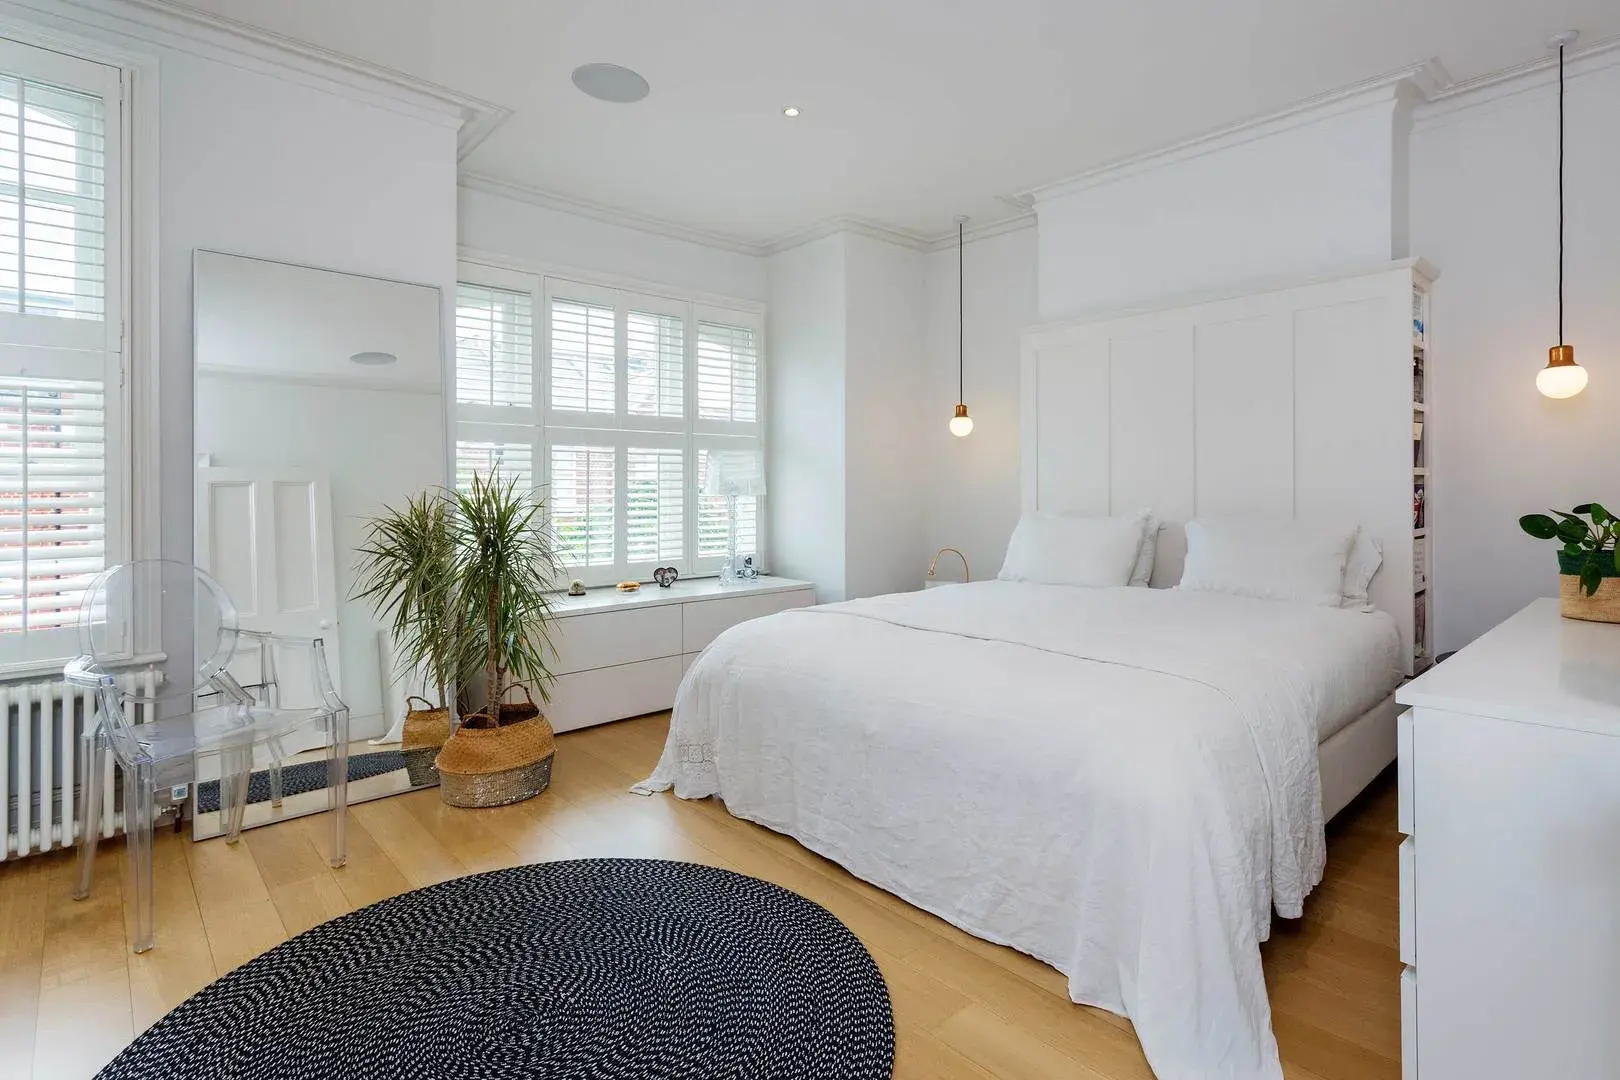 Fanthorpe Street, holiday home in Putney, London